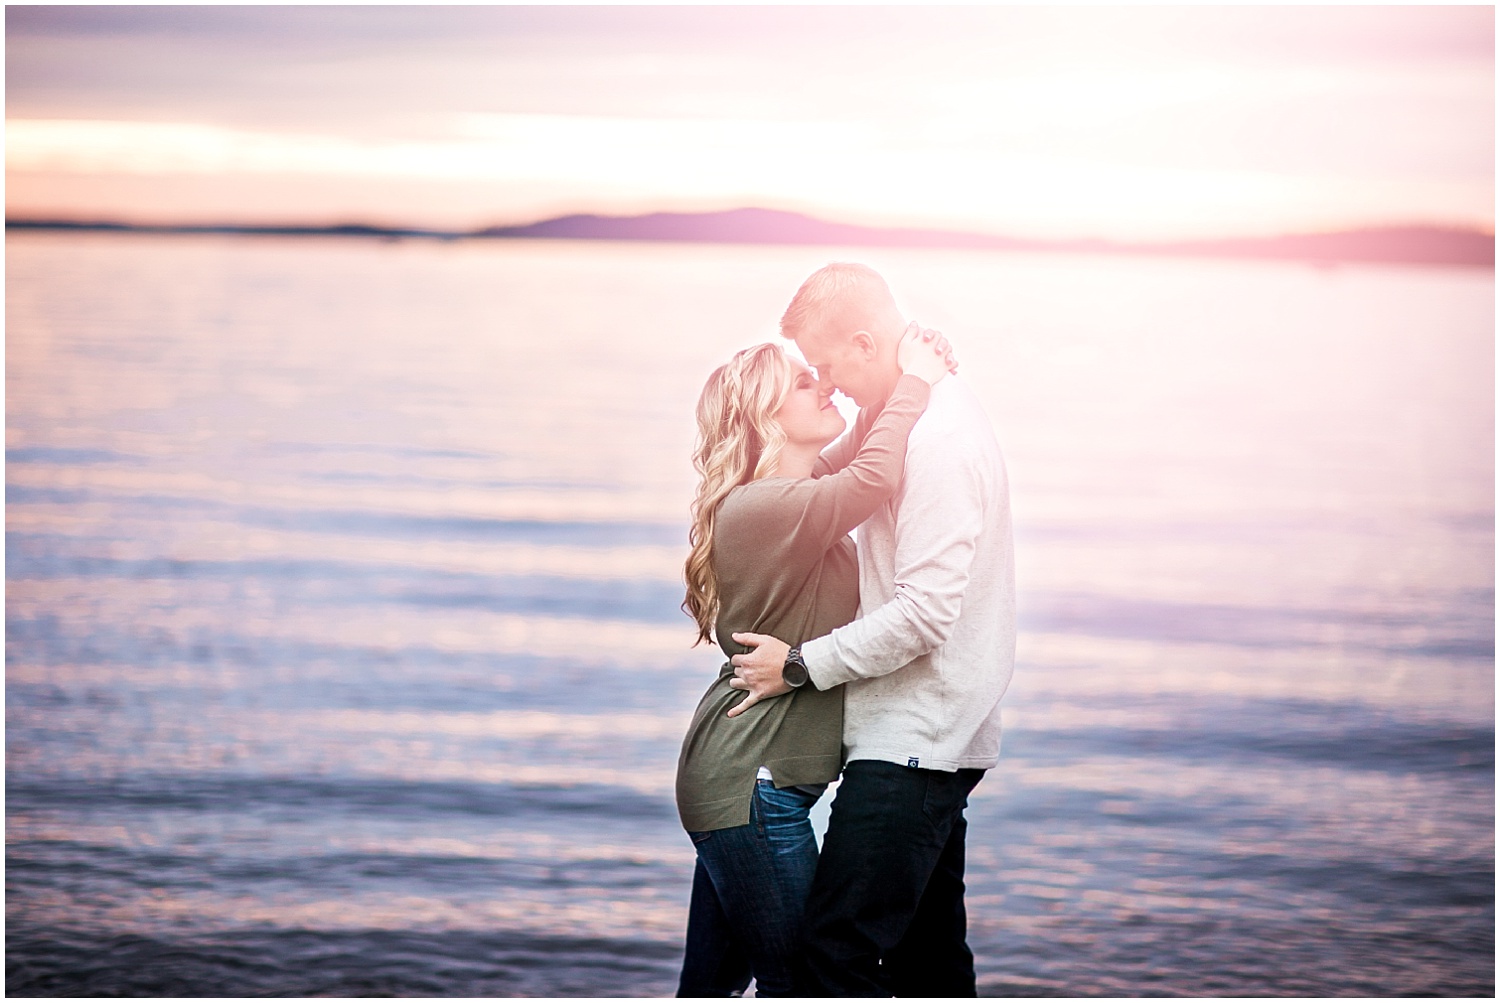 An Autumn Sunset Engagement at Discovery Park